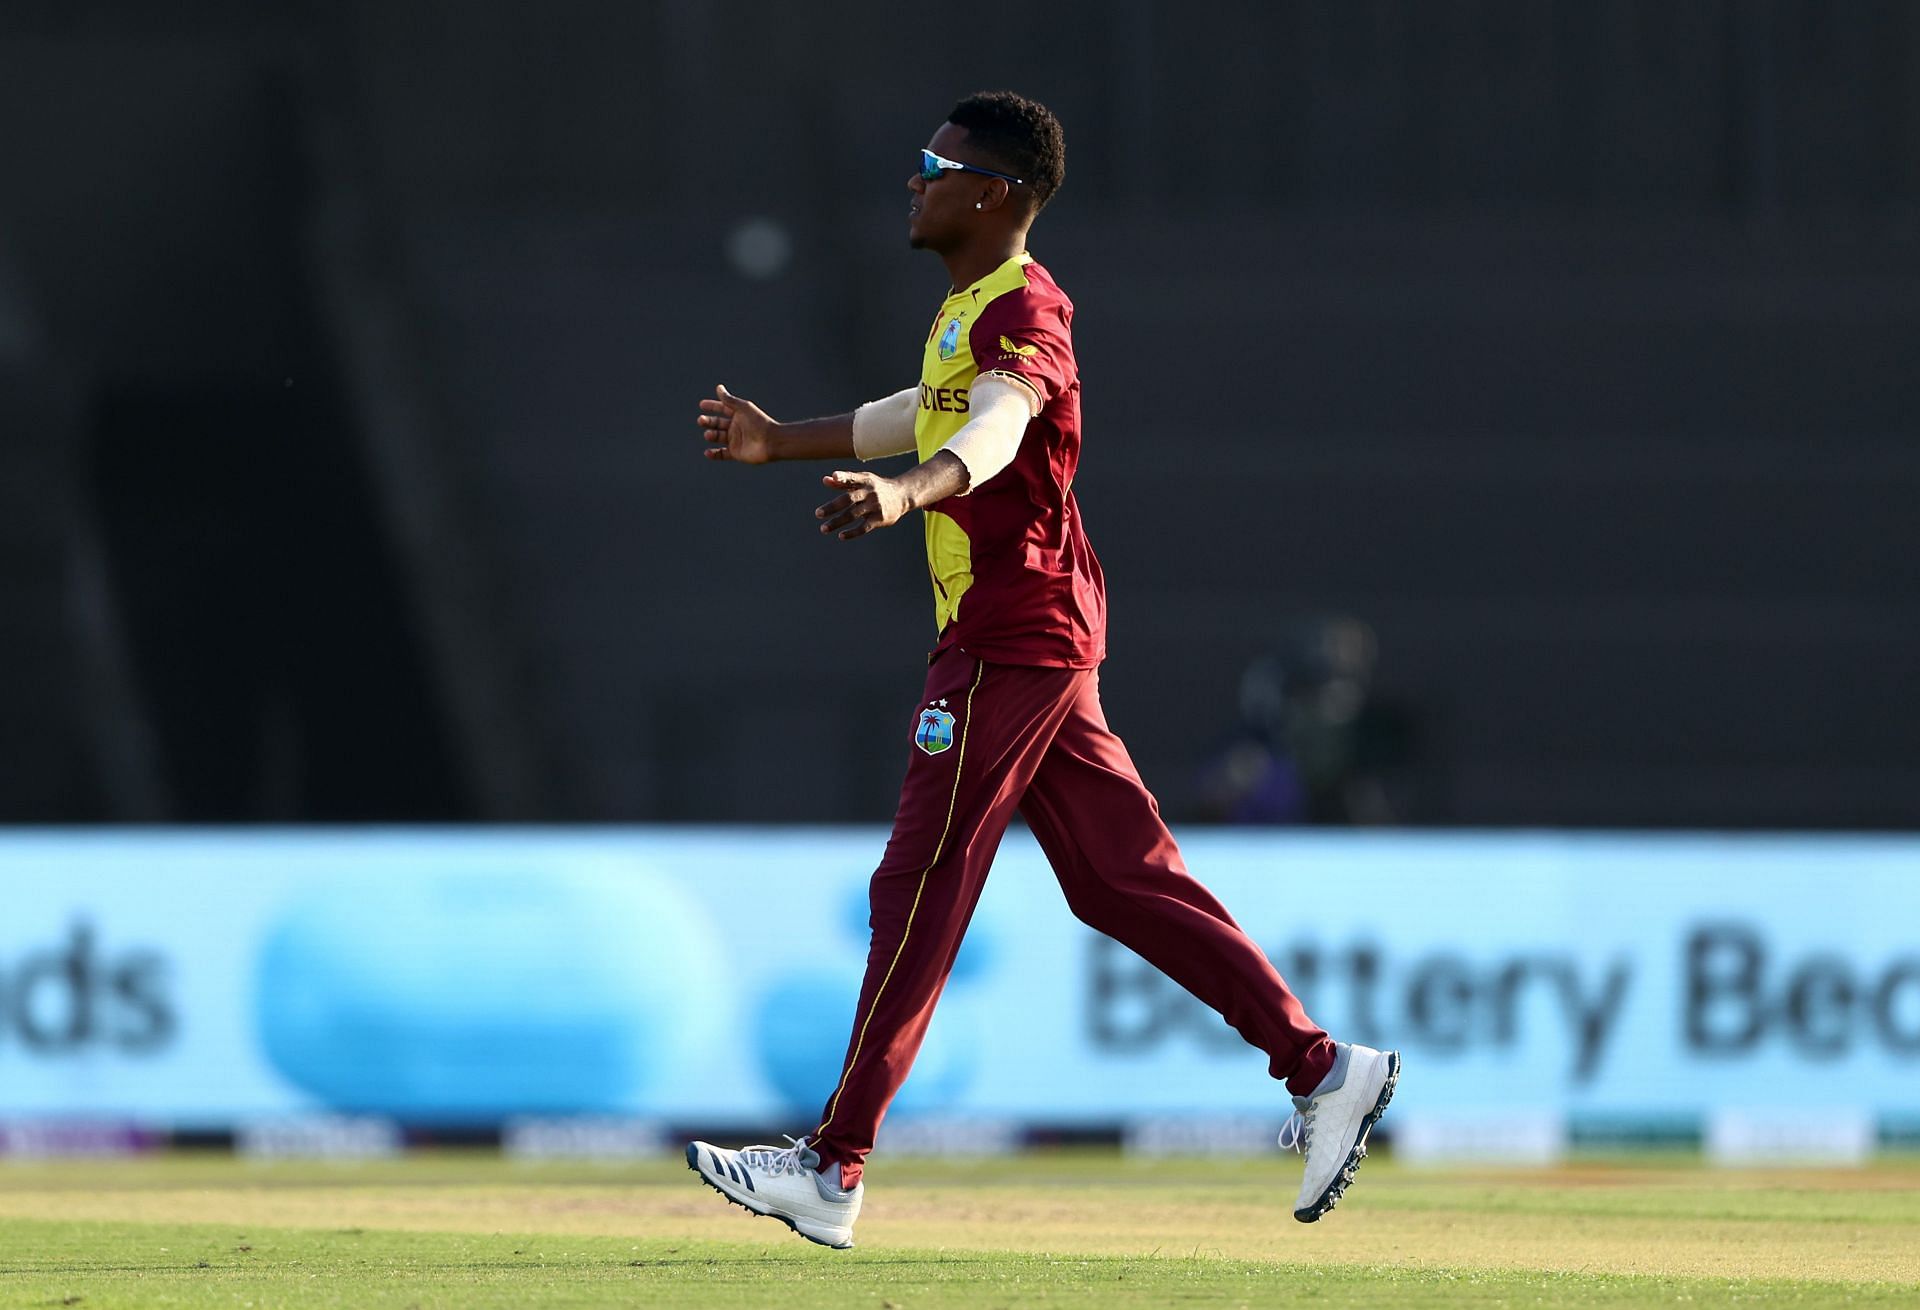 Akeal Hosein took five wickets for the West Indies team